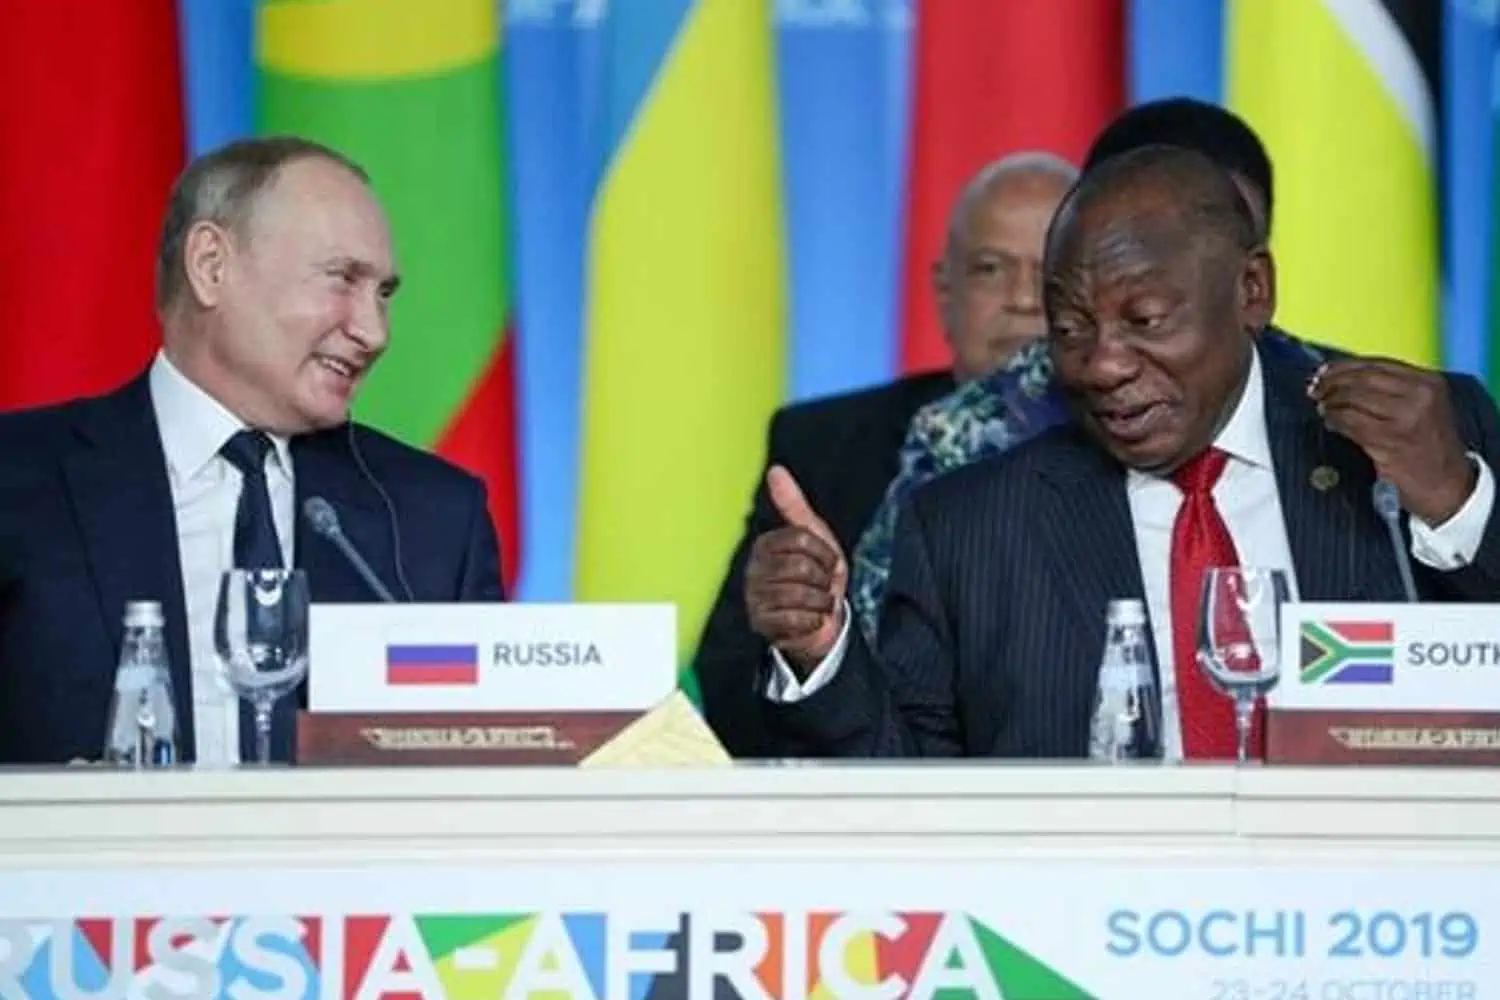 How the War with Russia Could Impact South Africa